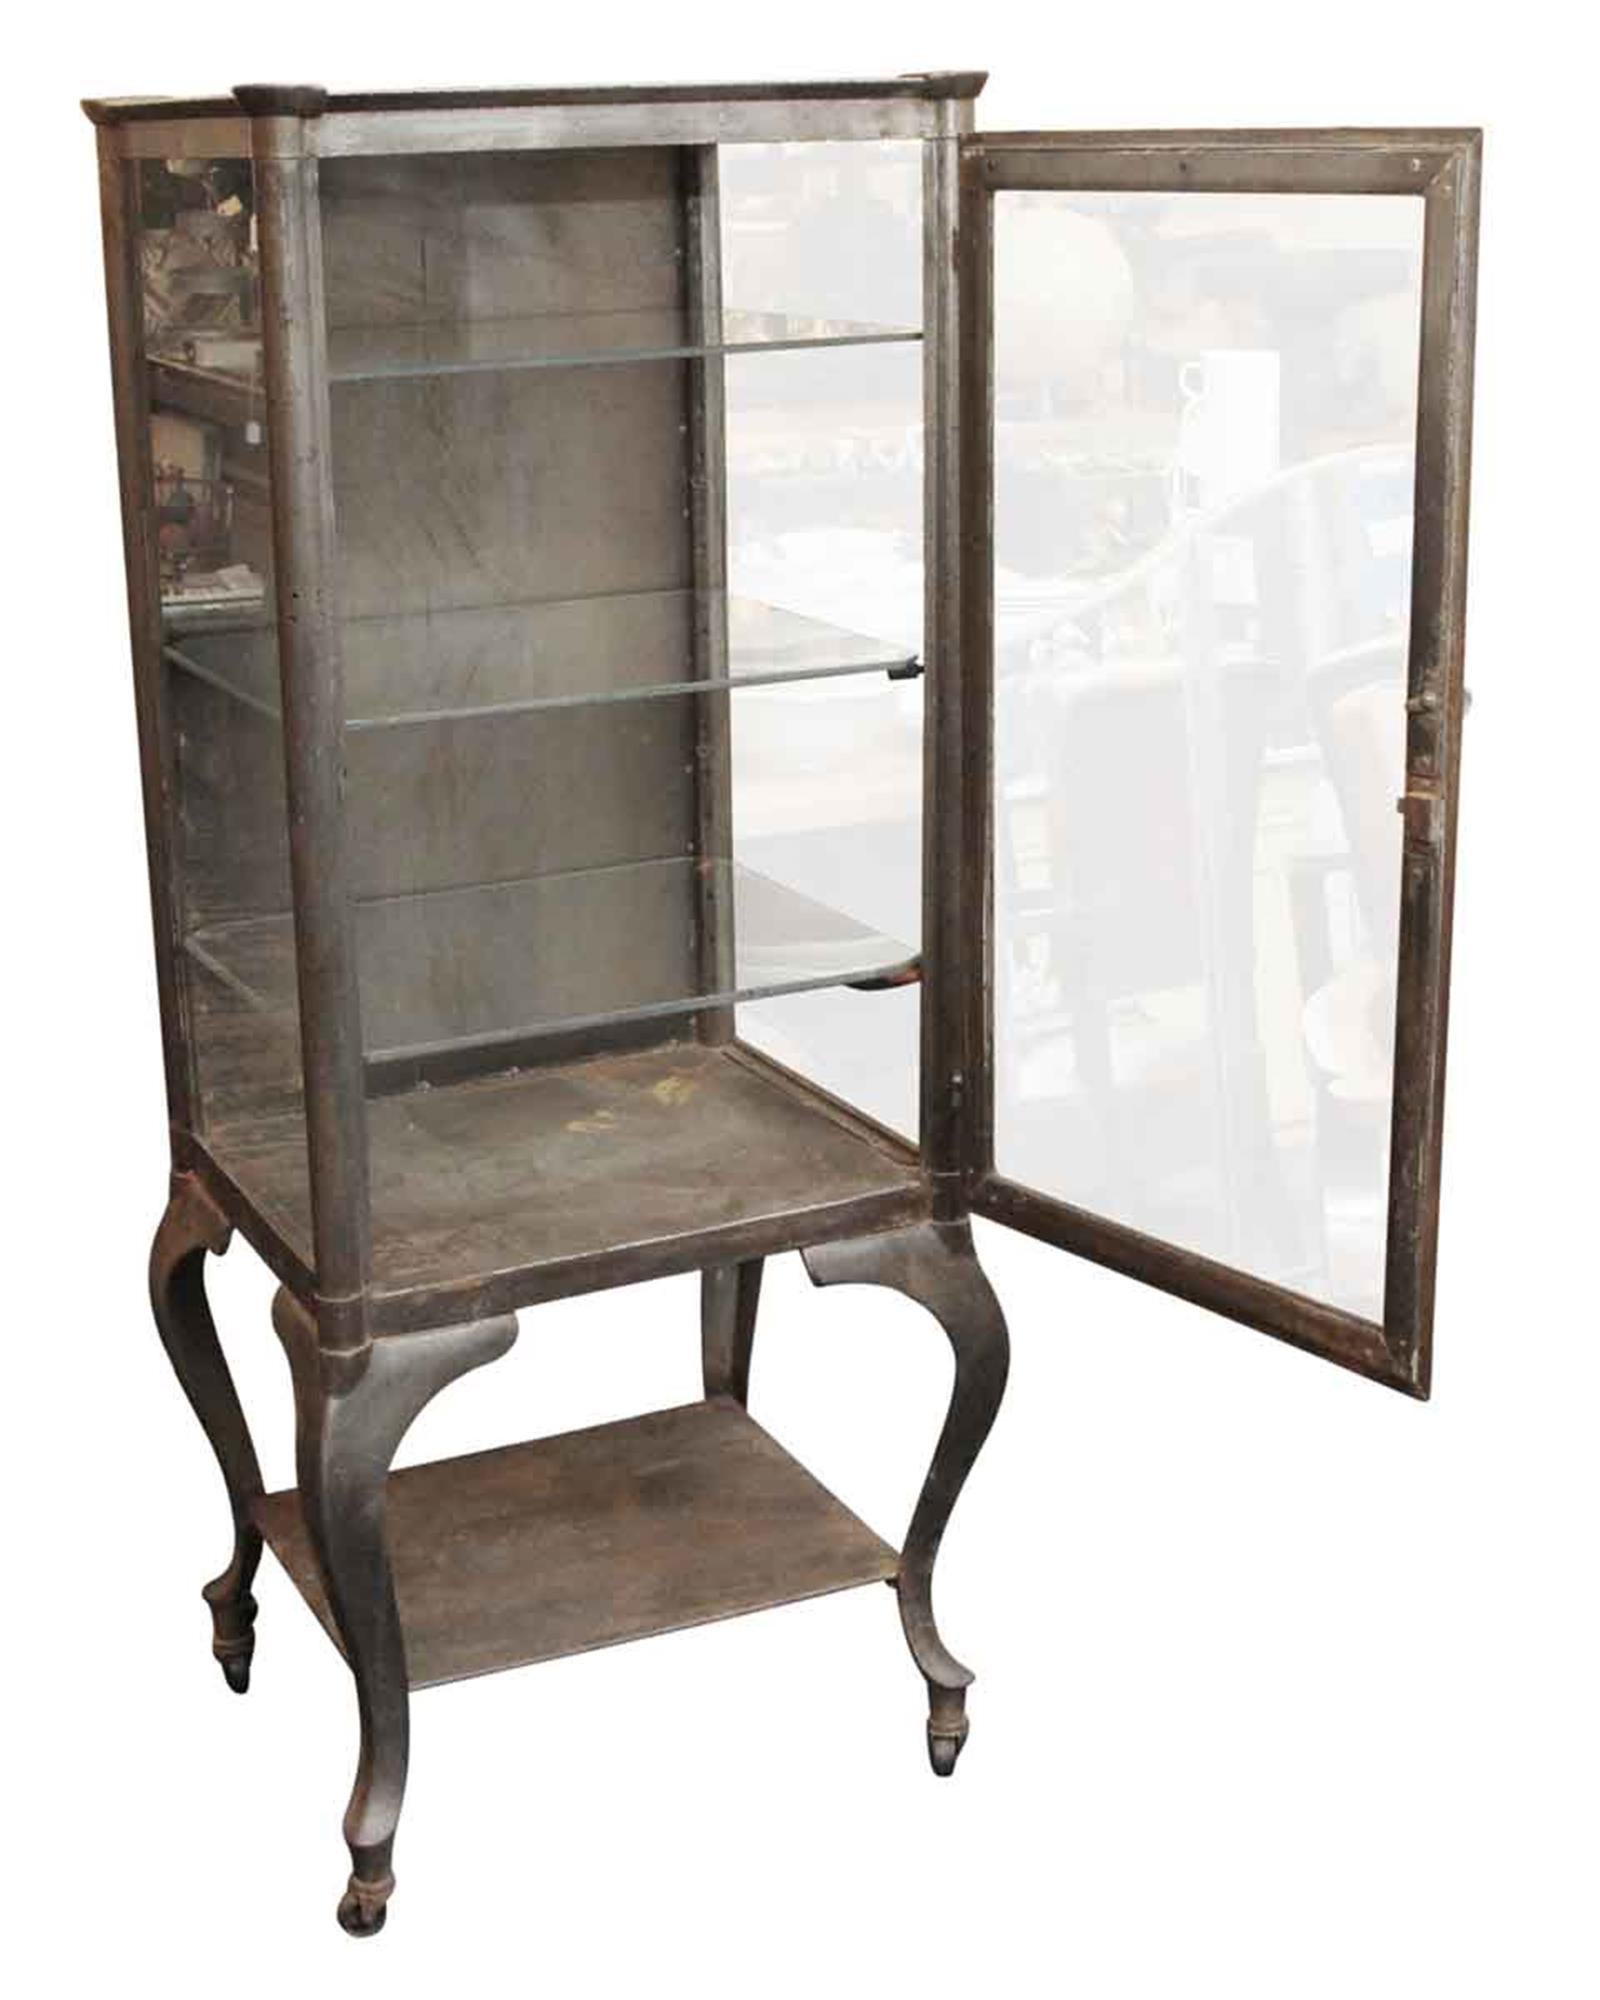 Early steel medical cabinet that has been stripped and lacquered with cabriole legs, circa 1910. It has a metal back with glass sides and 3 glass shelves in addition to a bottom shelf. This is a great piece for storage in a kitchen or bathroom or a